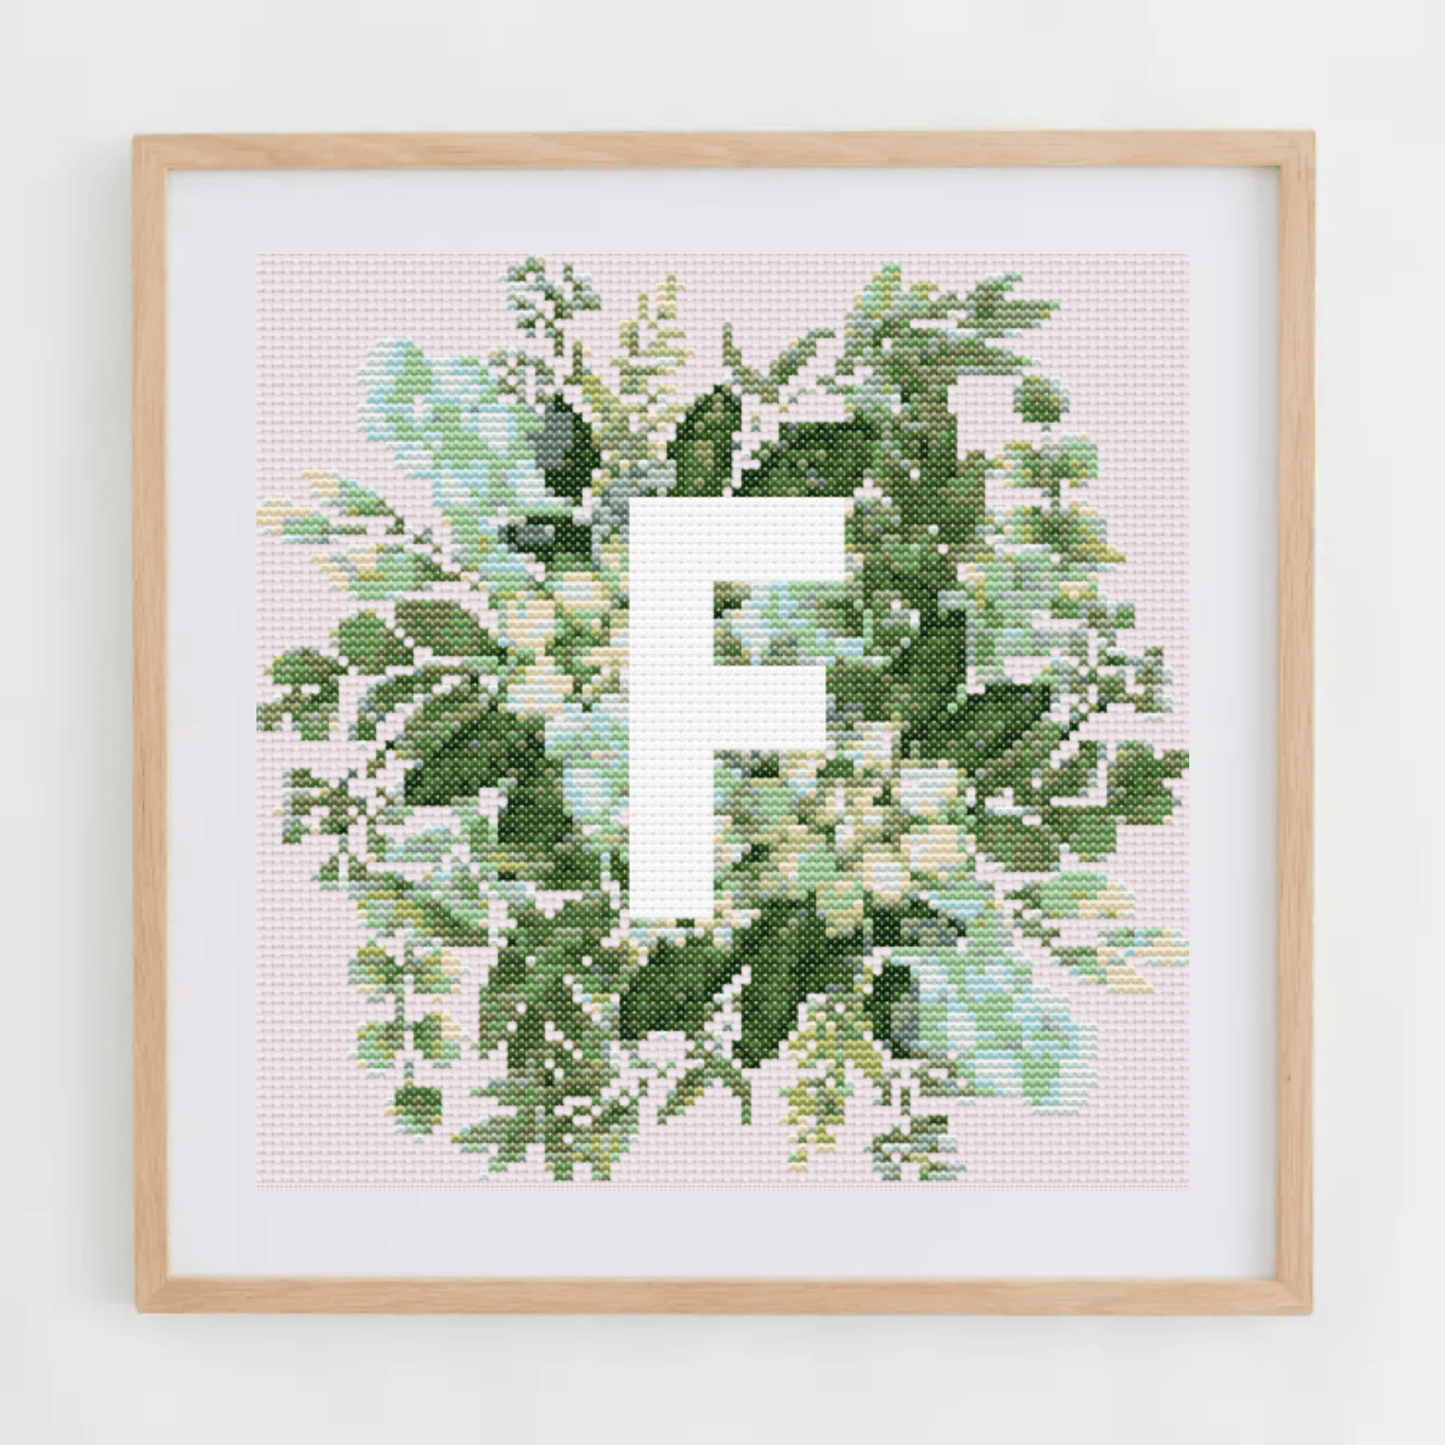 Monogram Cross-Stitch Pattern With Green Bouquet | Initial Cross Stitch Chart With Flowers and Leaves | Cross Stitch PDF